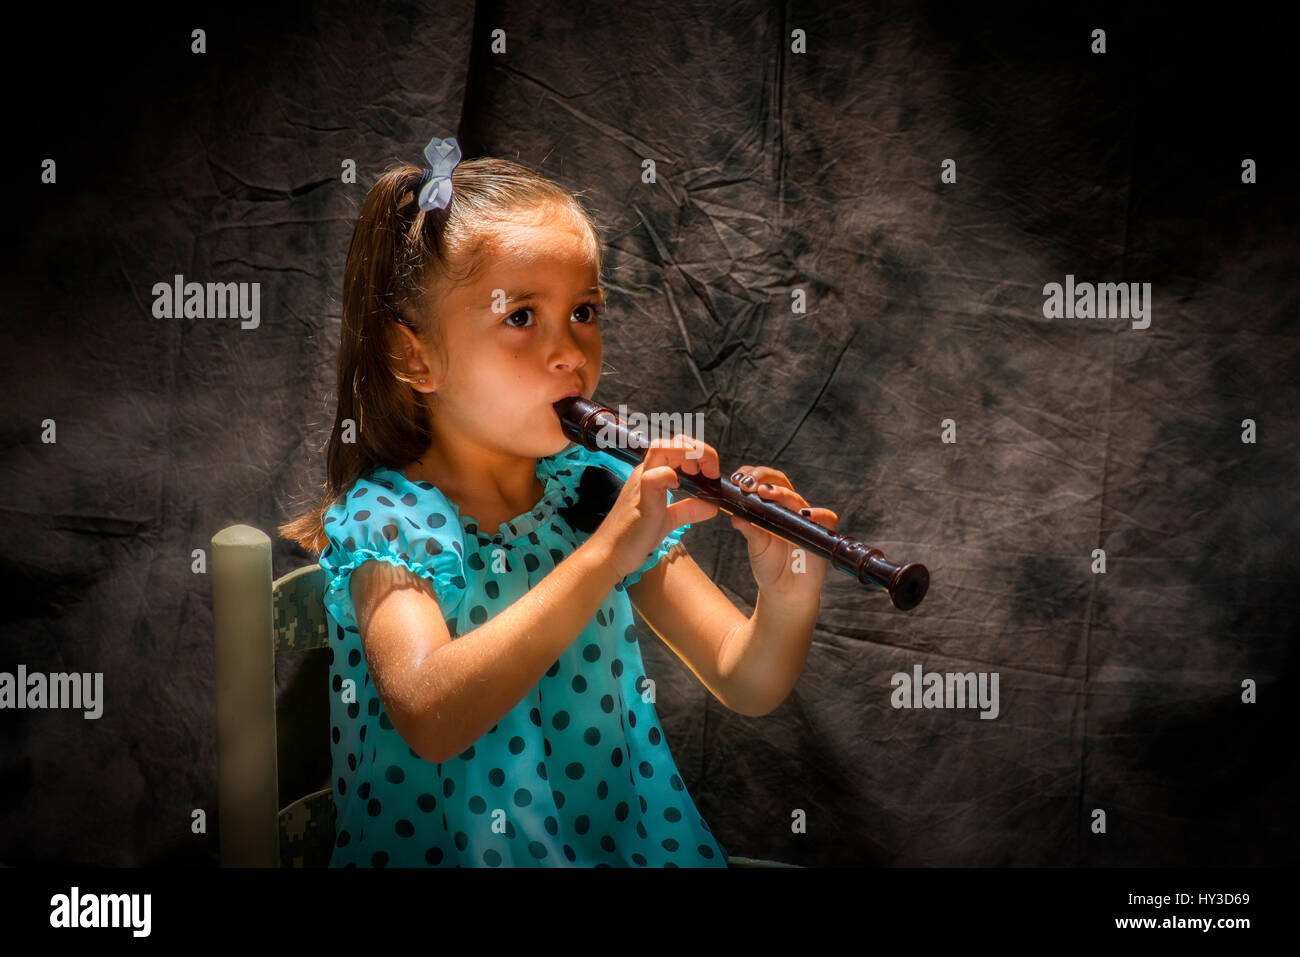 young girl playing flute Stock Photo